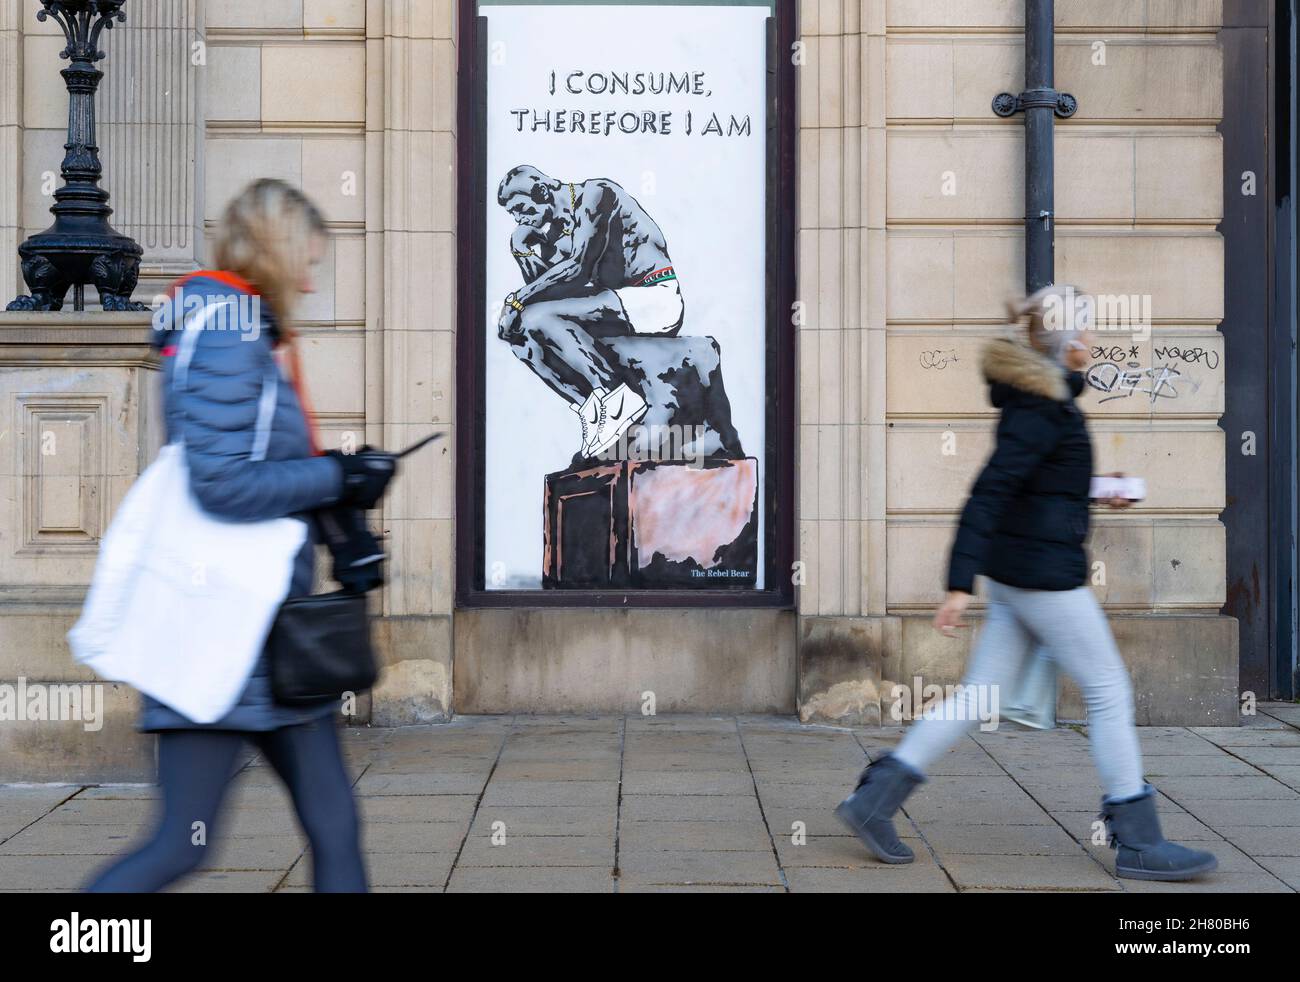 Edinburgh, Scotland, UK. 26th November 2021. On opening day of Black Friday sales new street art by Rebel Bear has appeared in Edinburgh city centre. The street art with the message “I consume therefore I am “ seems to mock the importance of the modern consumerism culture. Iain Masterton/Alamy Live News. Stock Photo